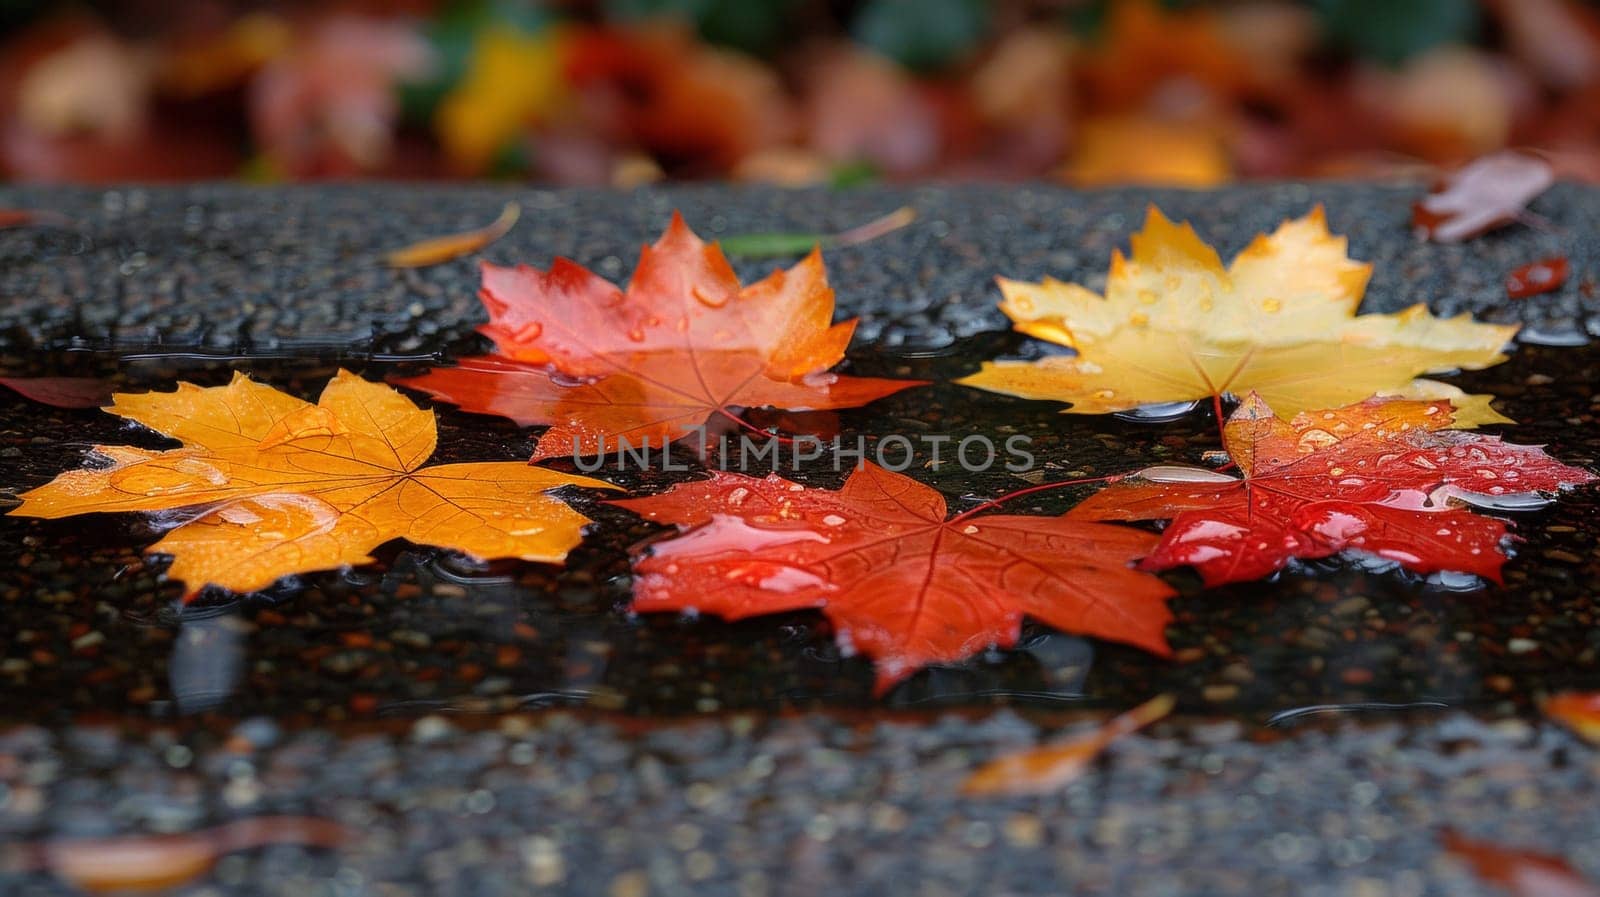 A group of leaves are sitting on the ground with water